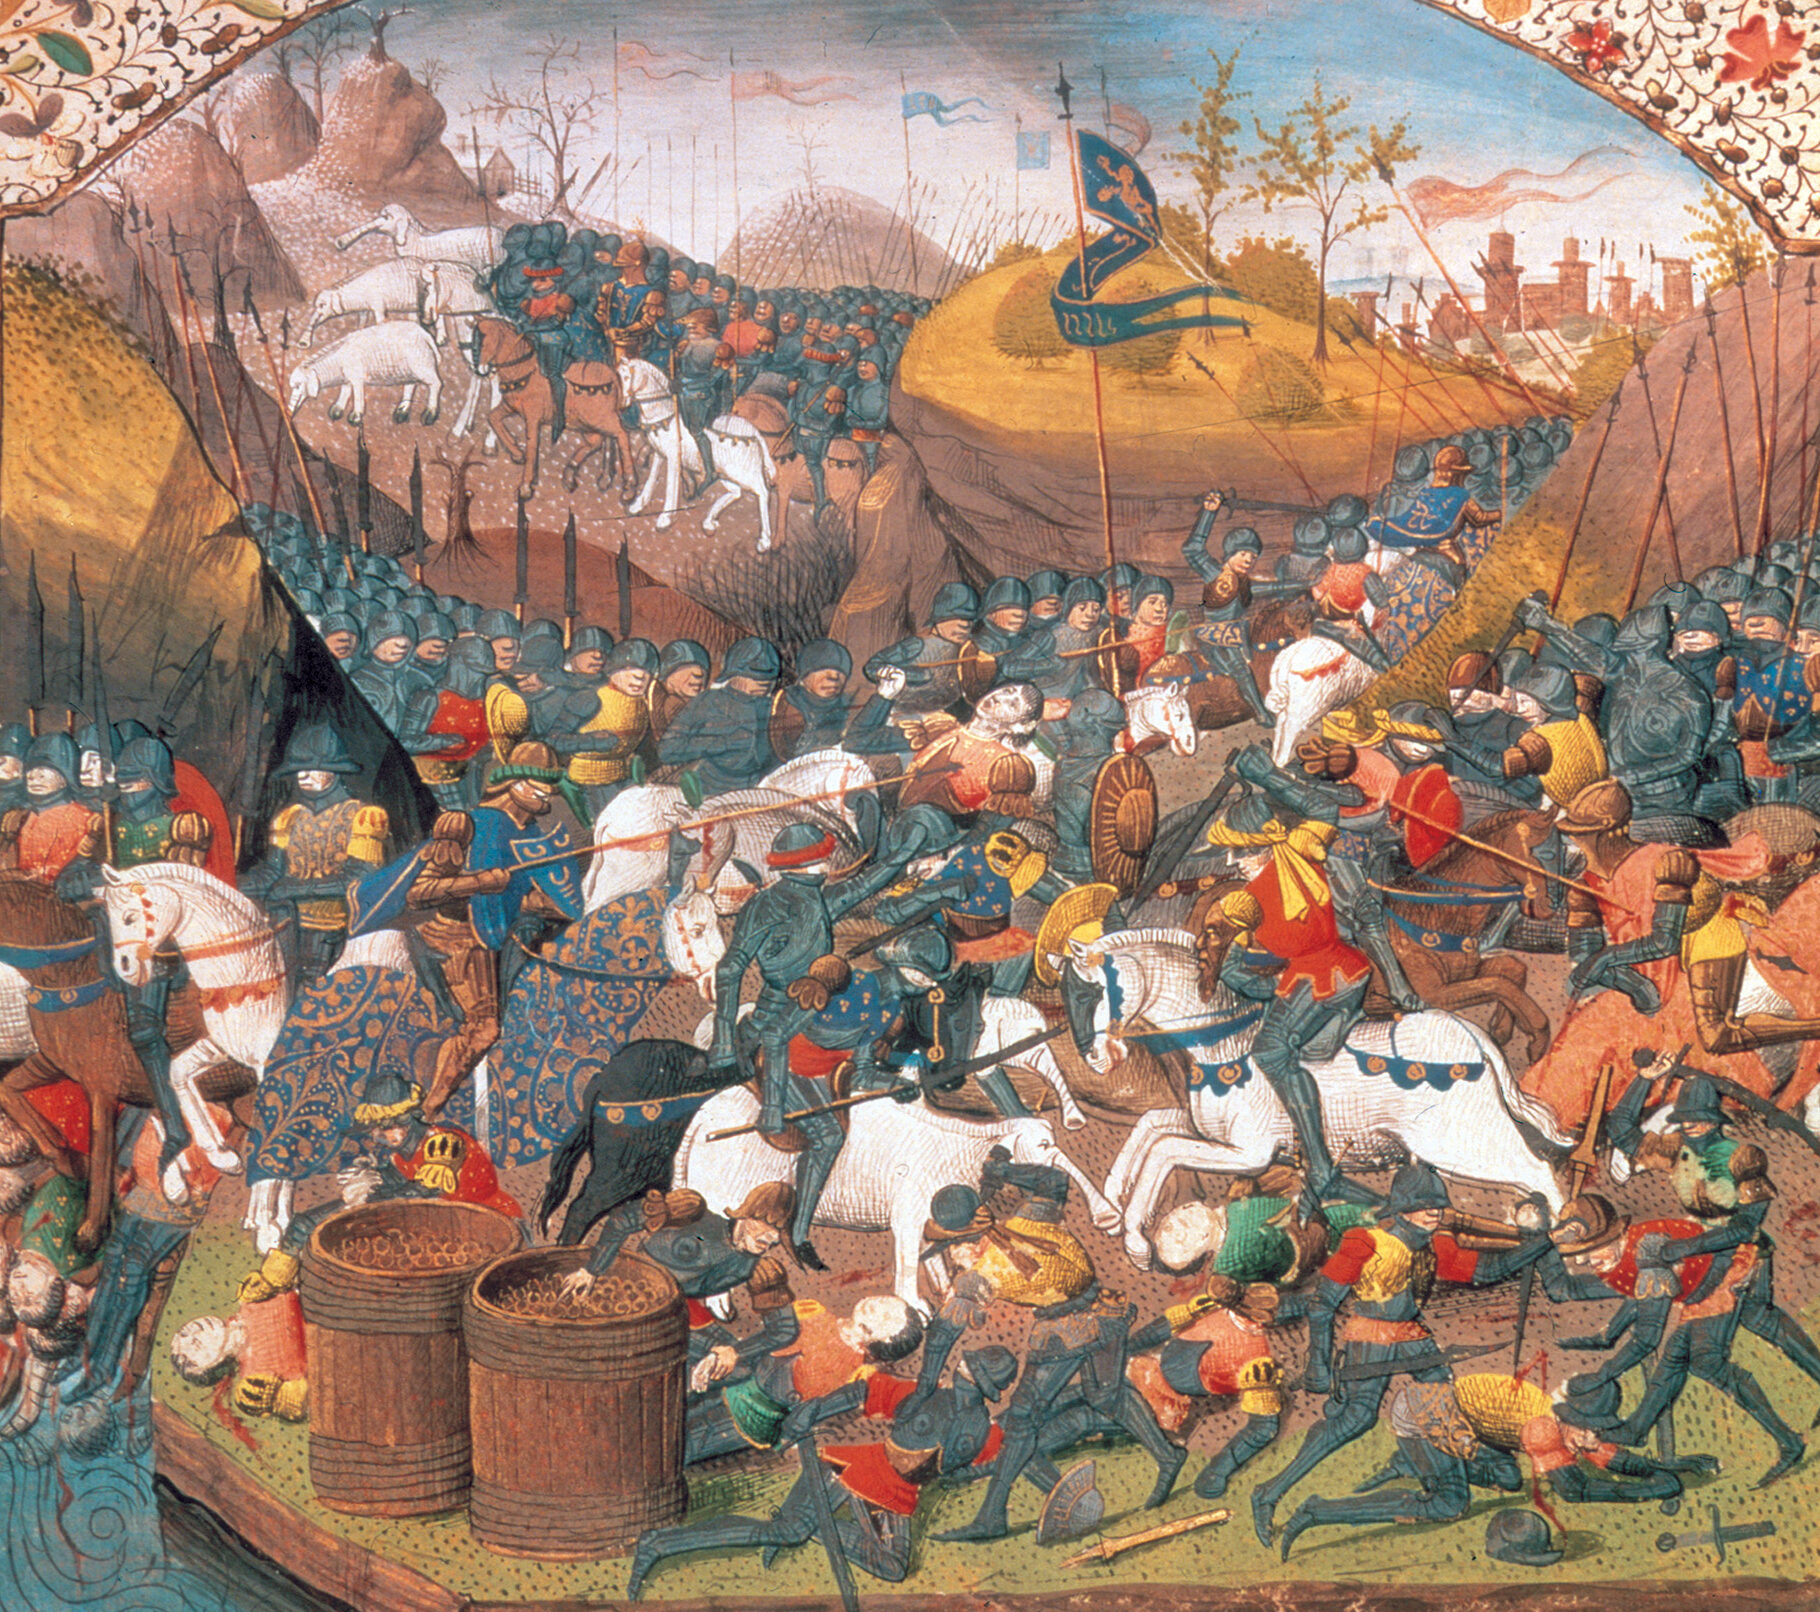 A fanciful Renaissance version of Hannibal’s army battling local tribes west of the Alps on its march toward Roman territory.